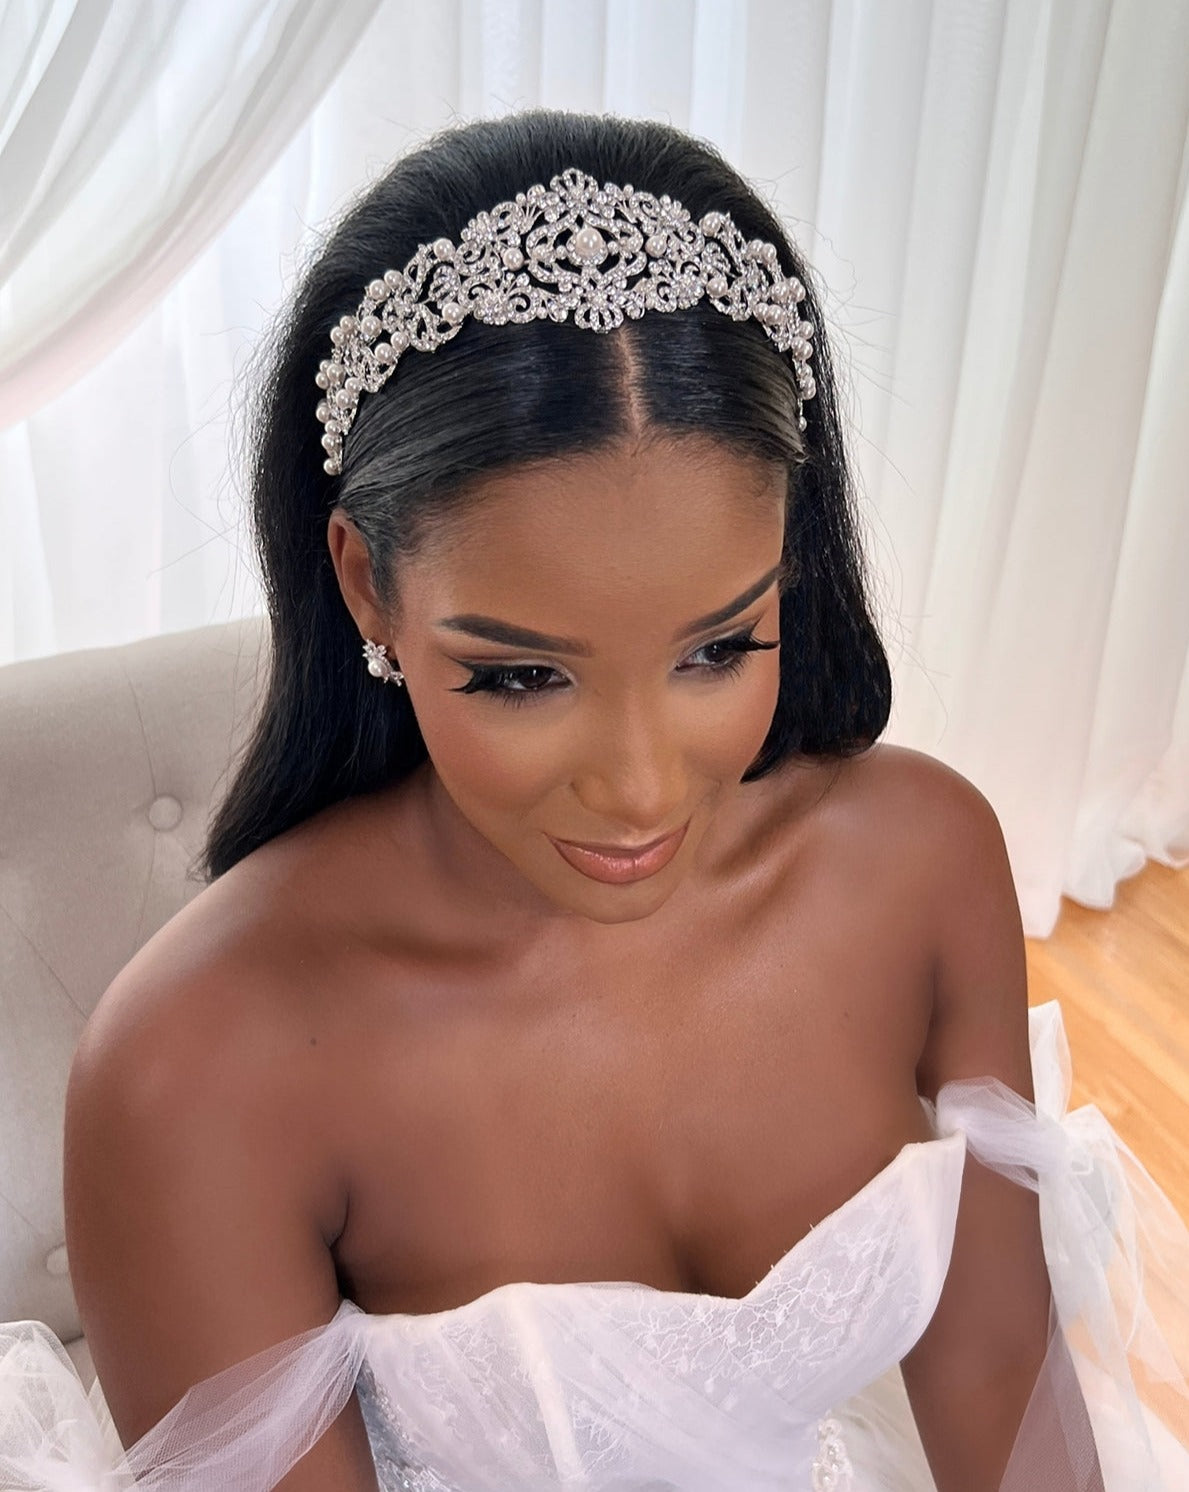 female model wearing crystal bridal headband with swirling silver details and pearl accents